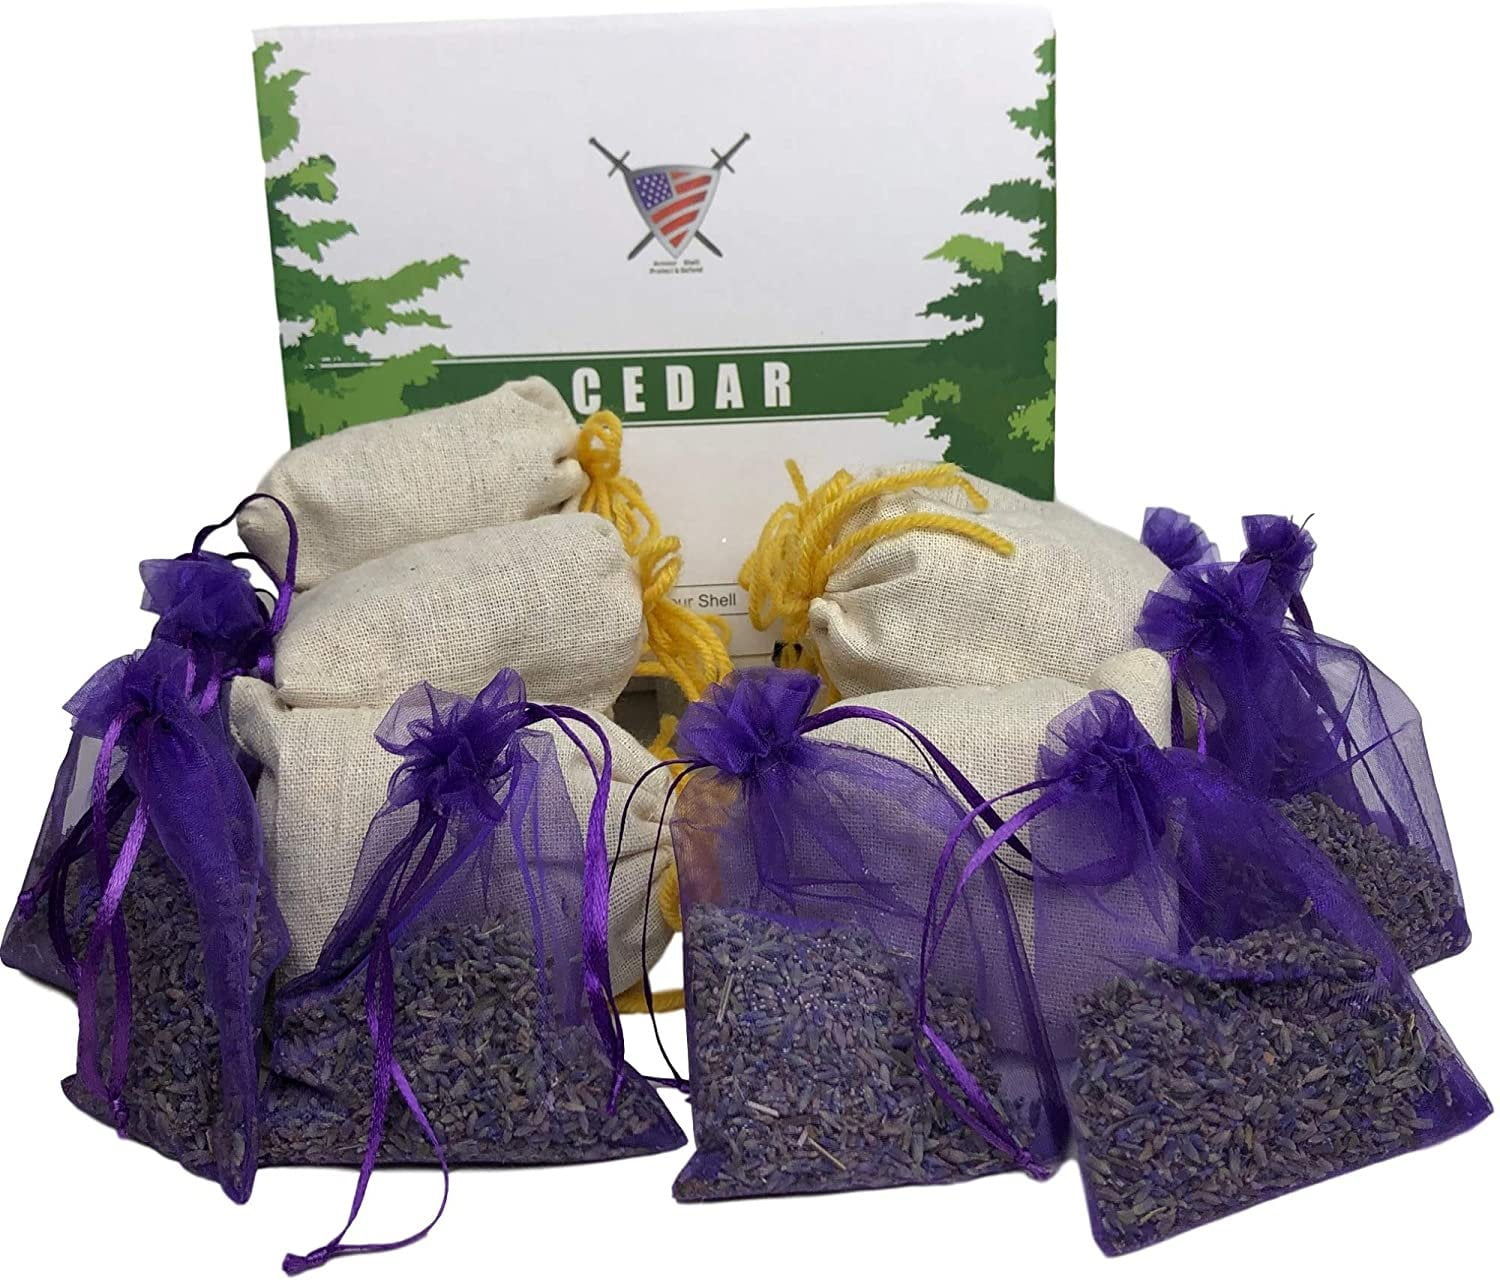 10 Cedar and 10 Lavender Sachet Bags, Fully Stuffed Sachets, Perfect for  Closets, Drawers, Cars, Gym Bags